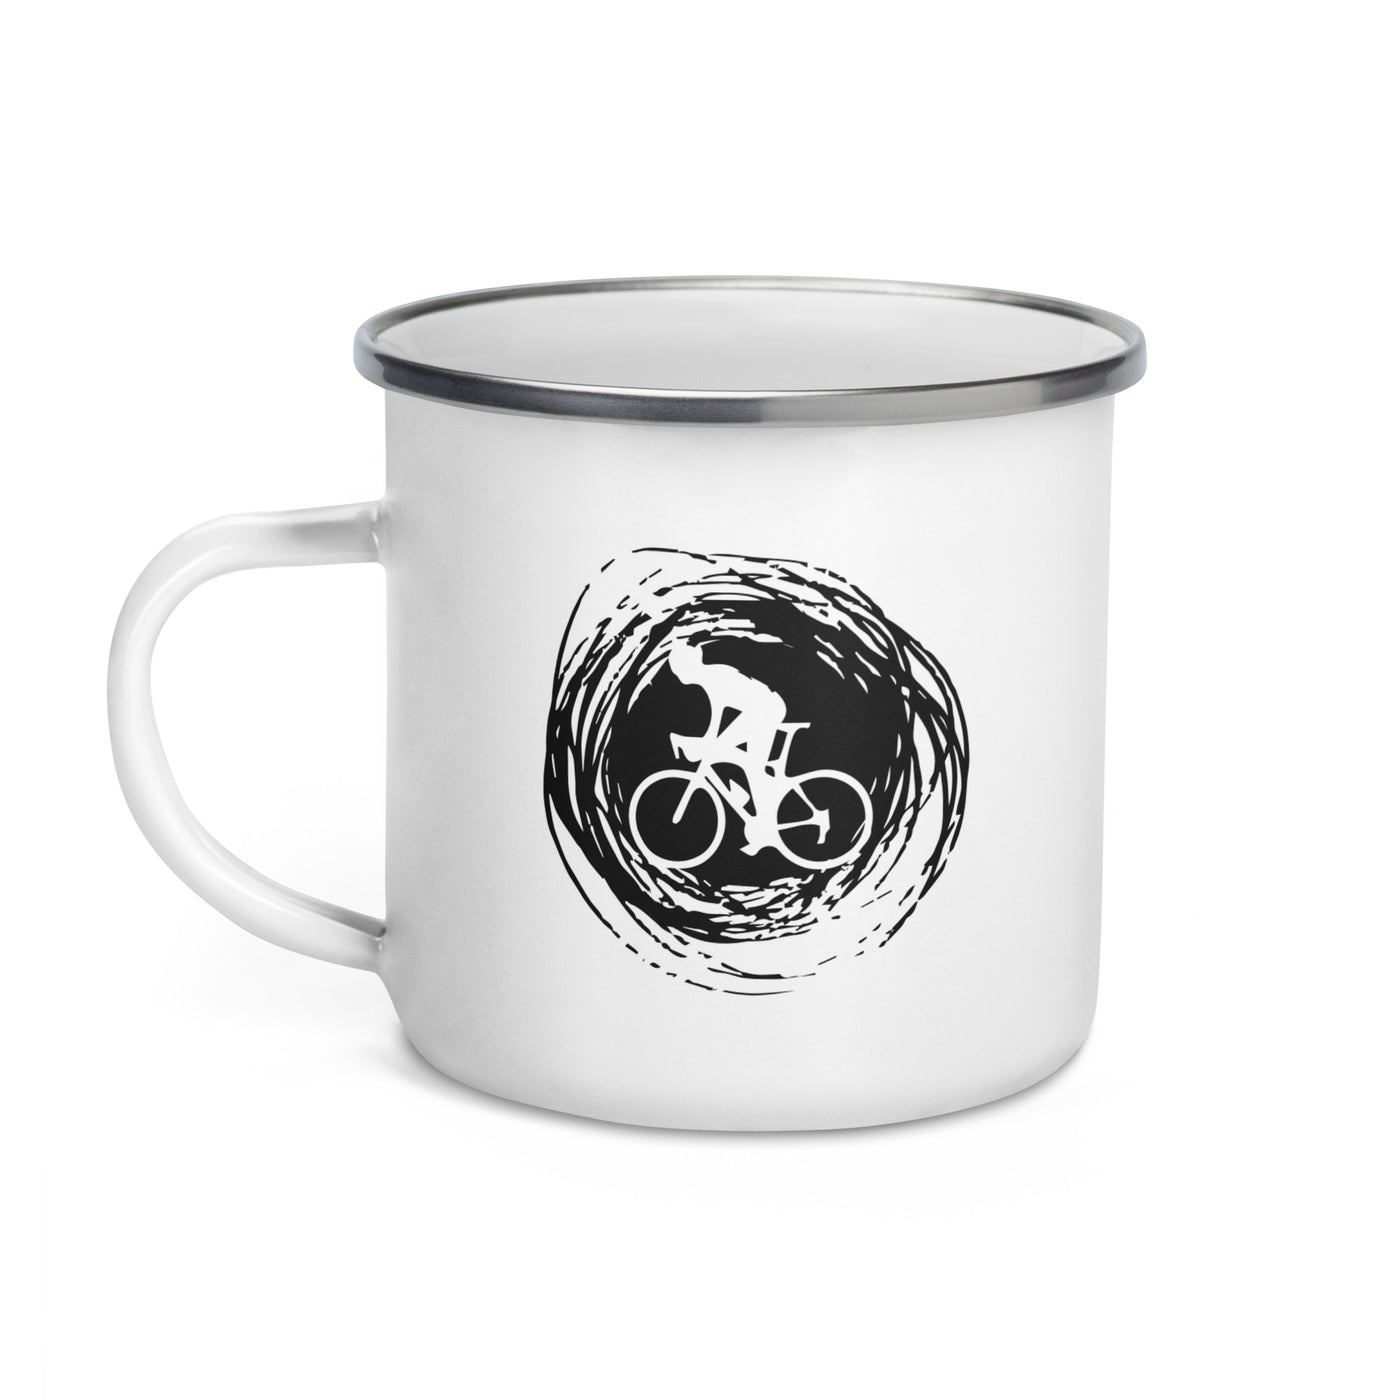 Circle - Cycling - Emaille Tasse fahrrad